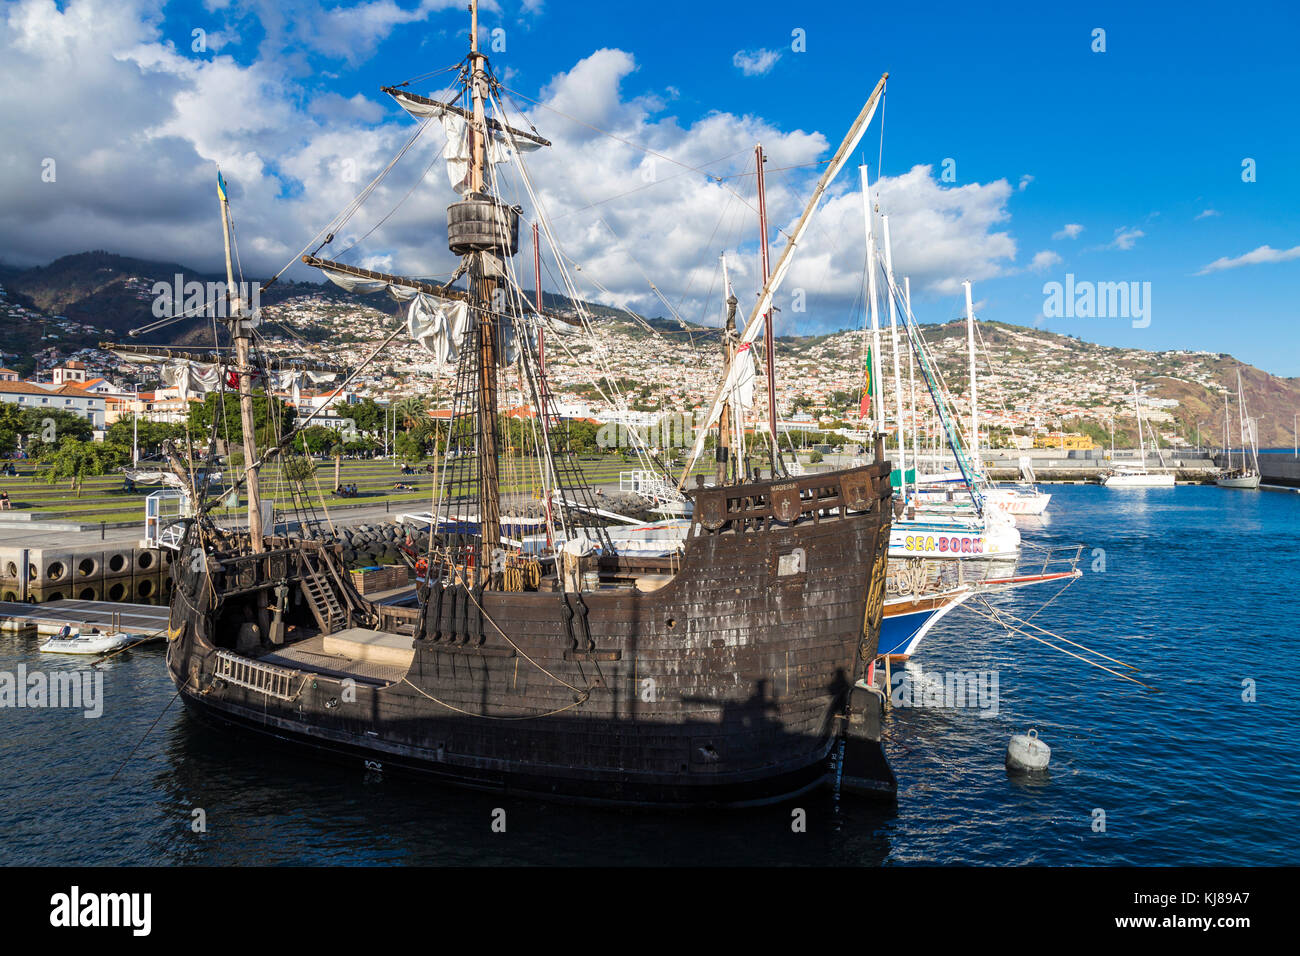 Replica of the Santa Maria sailing ship in the port at Funchal, Madeira, Portugal Stock Photo